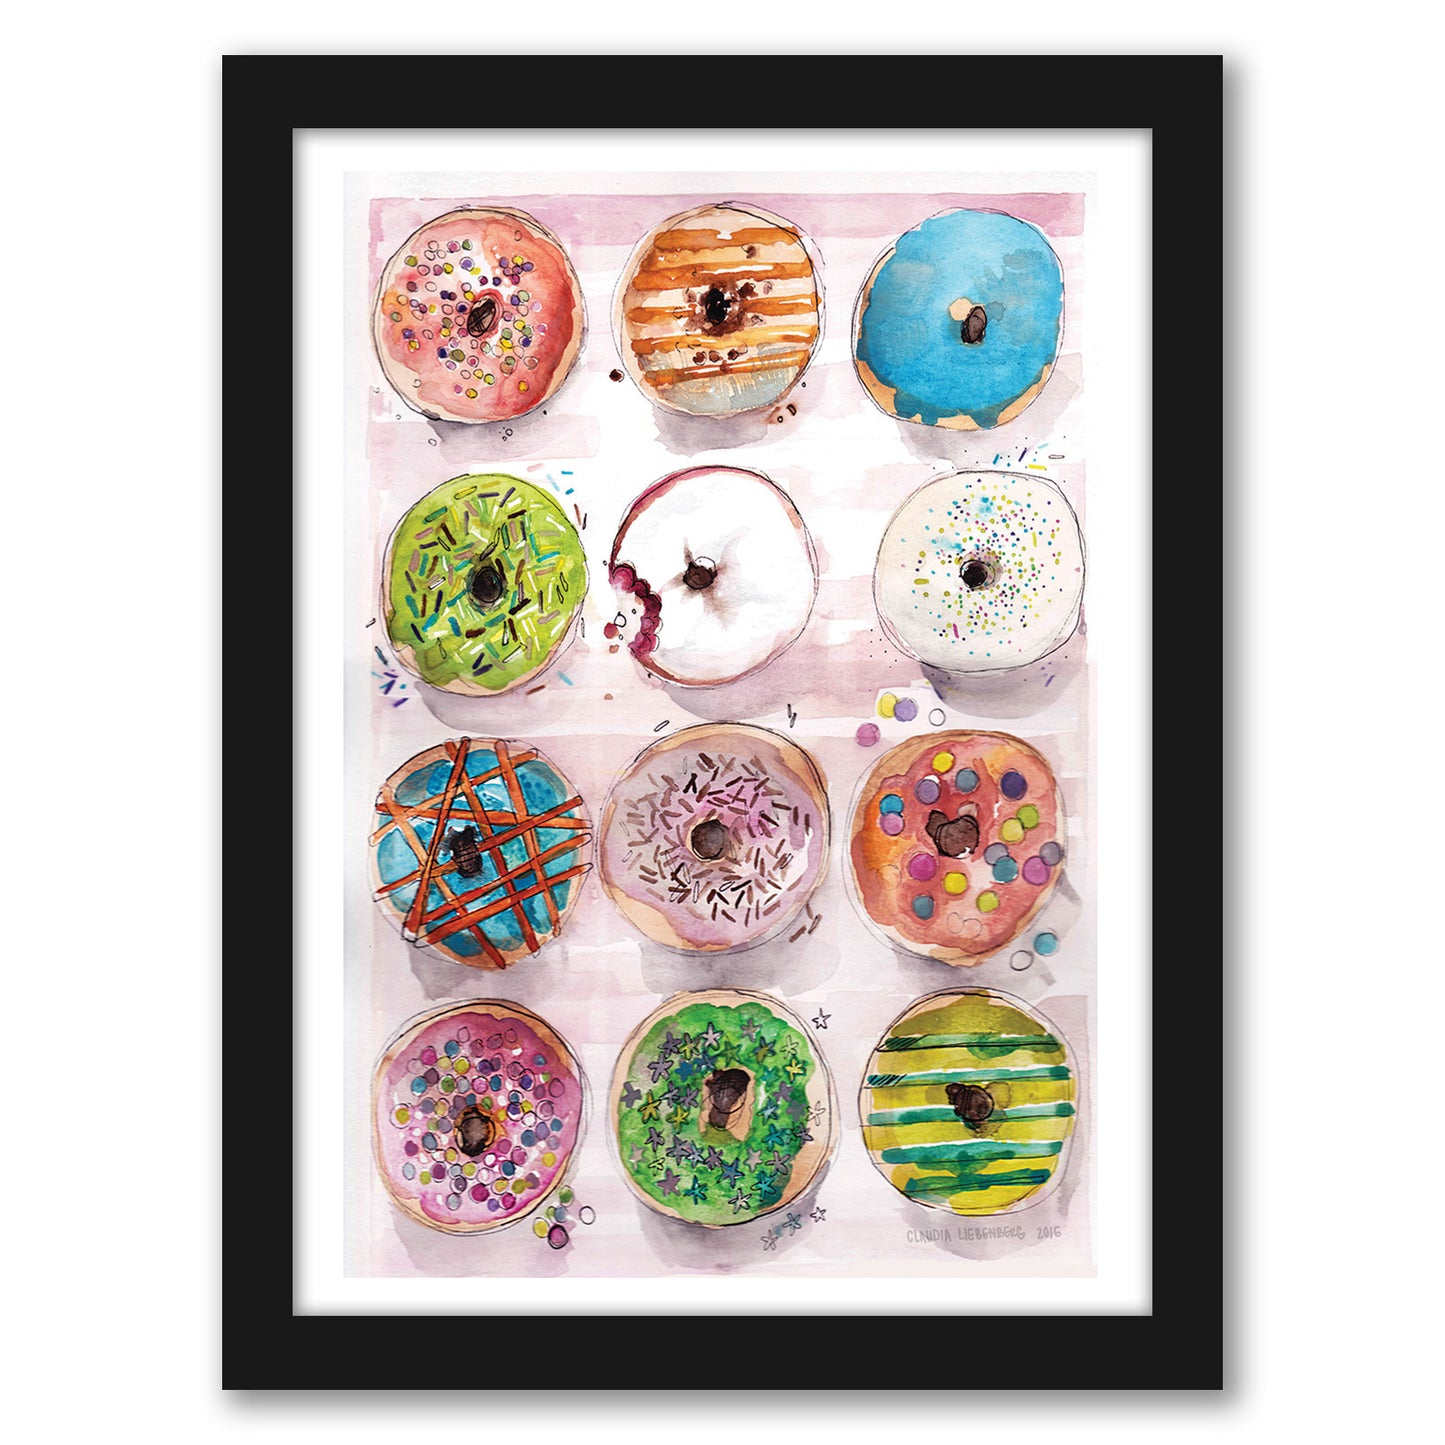 Donuts by Claudia Liebenberg - Framed Print